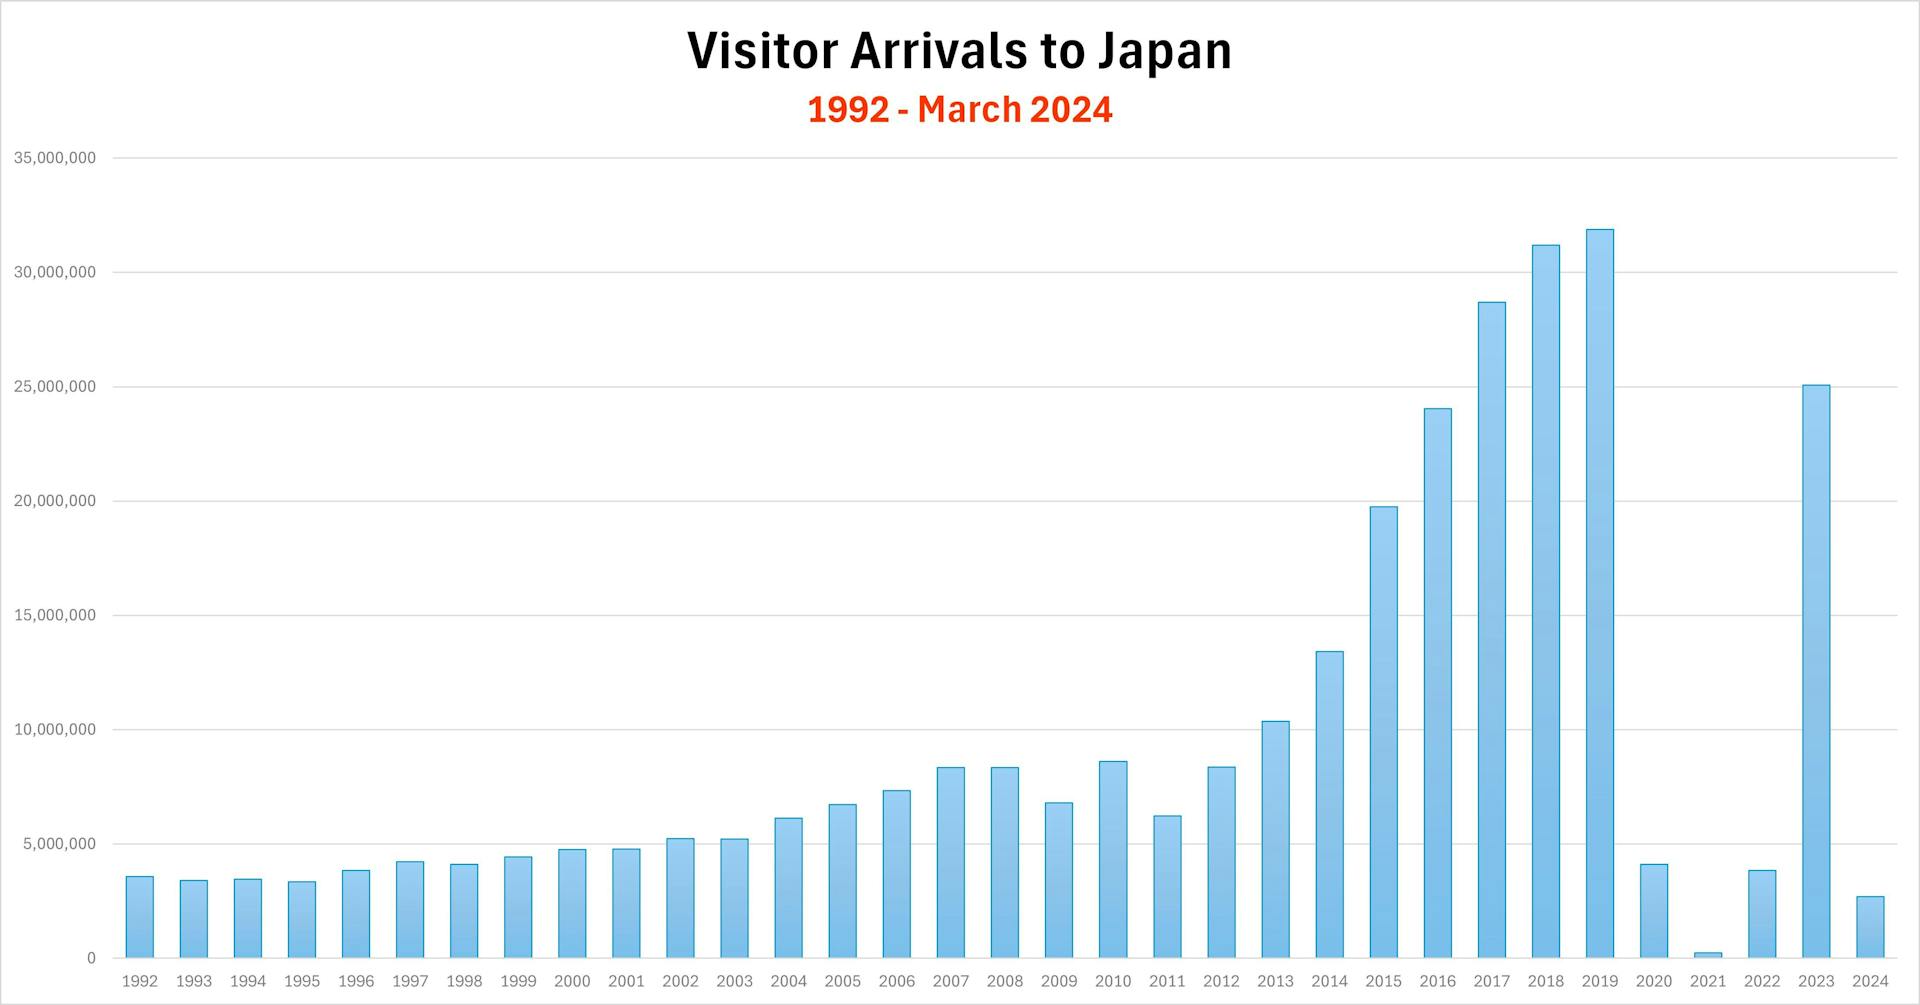 This chart waas created by Romancing Japan, based on statistical data from the Japan National Tourism Organization. Photo source: James Saunders-Wyndham